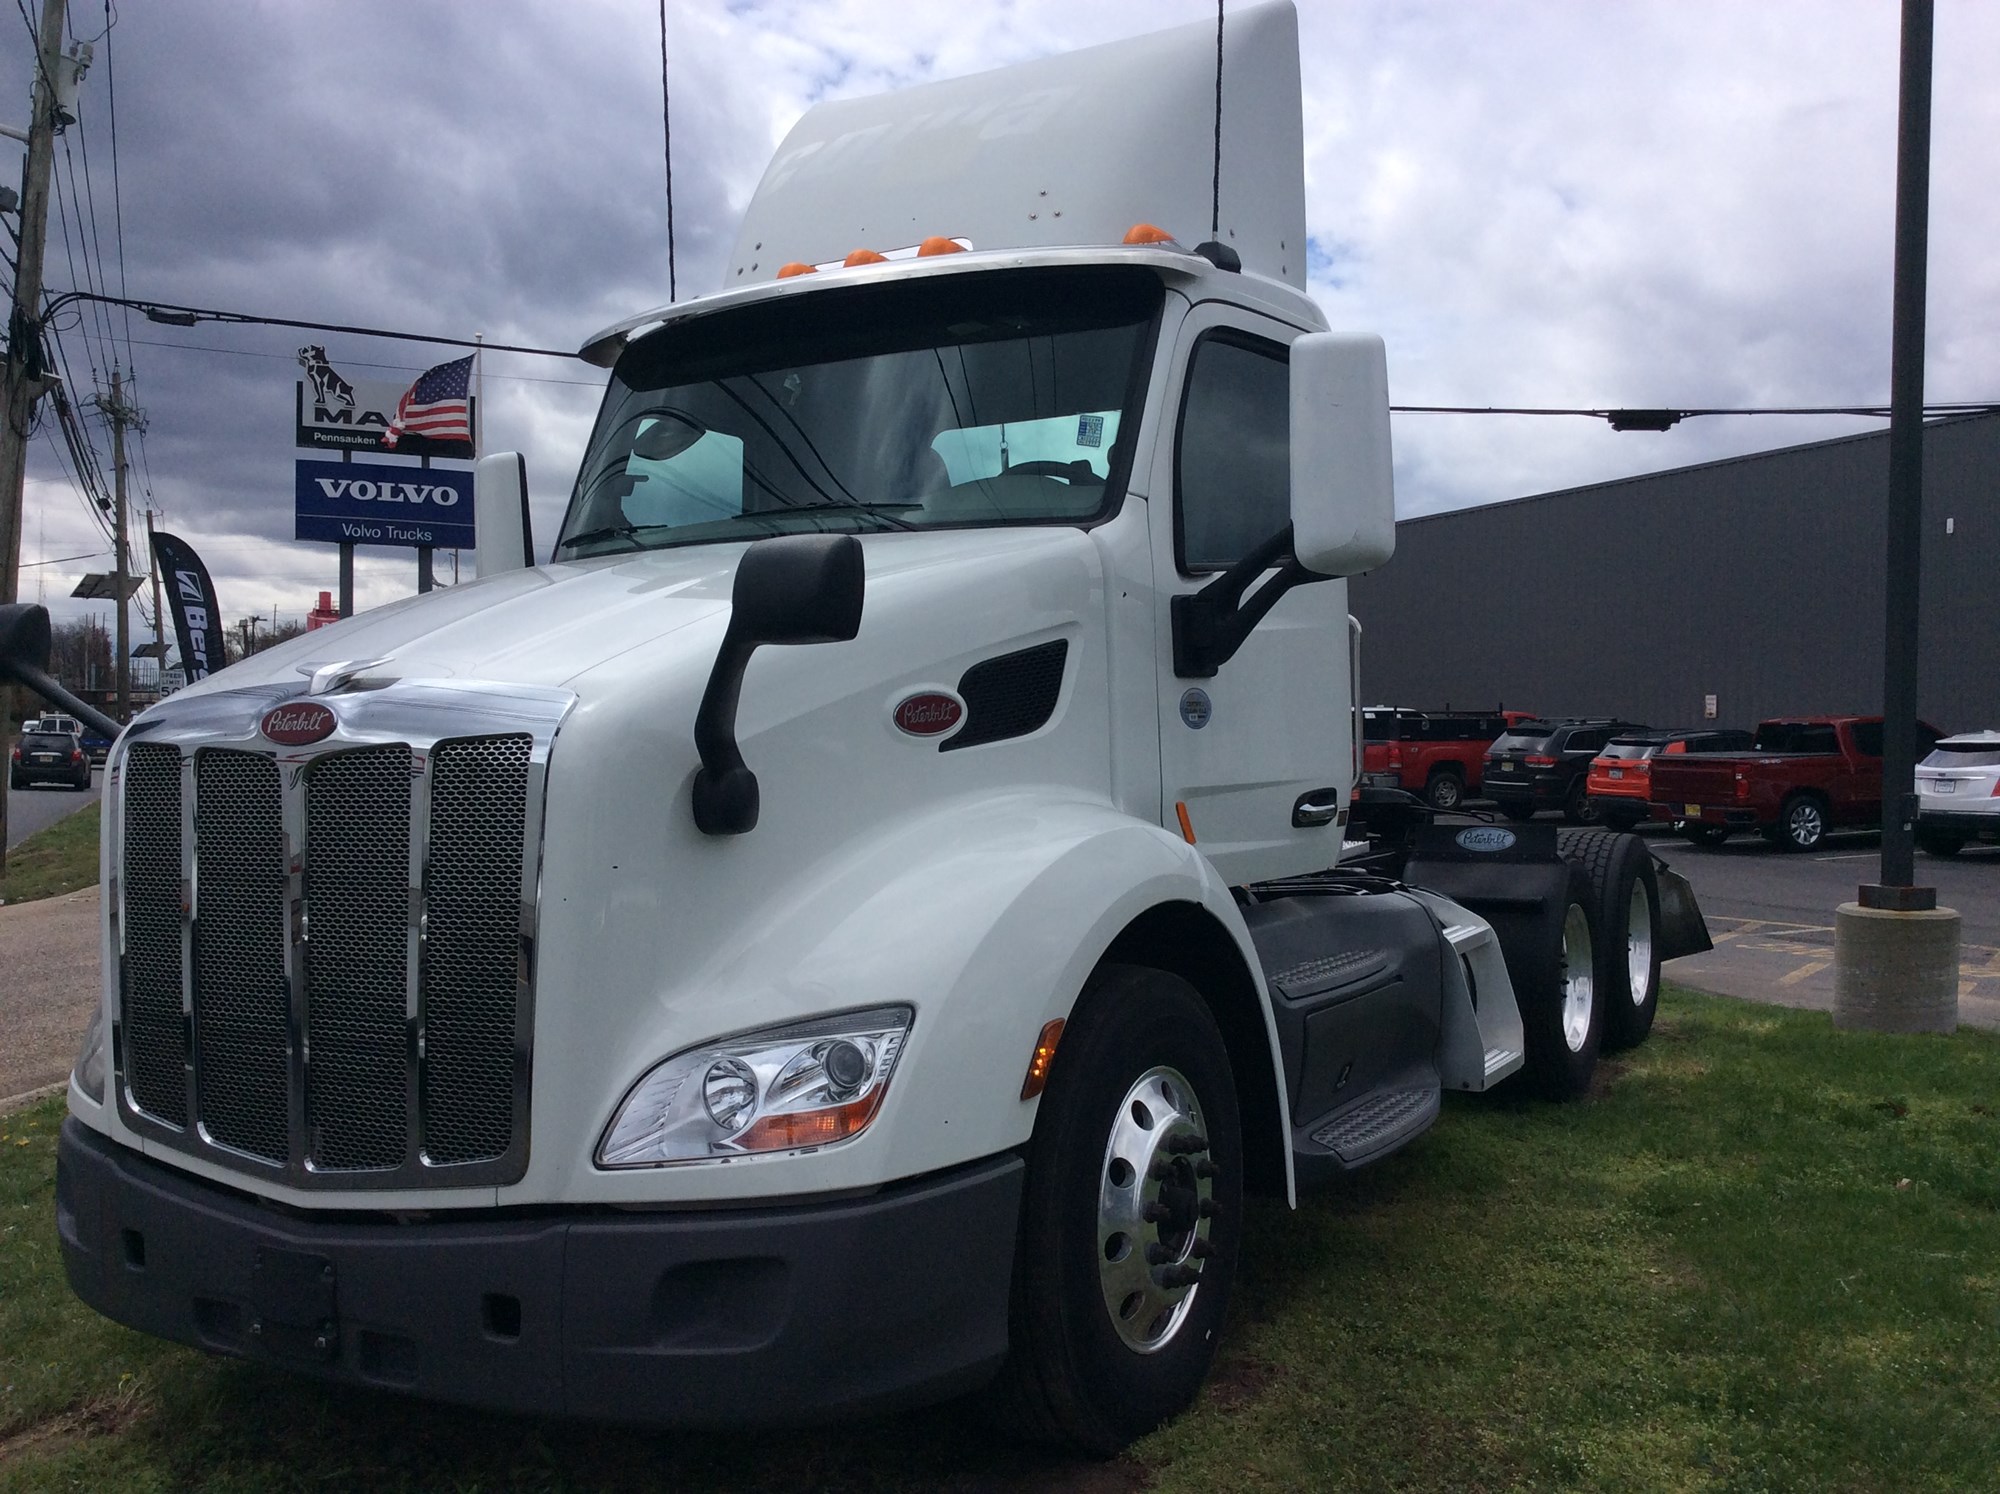 Used Truck Inventory - 1000907 01 - 7